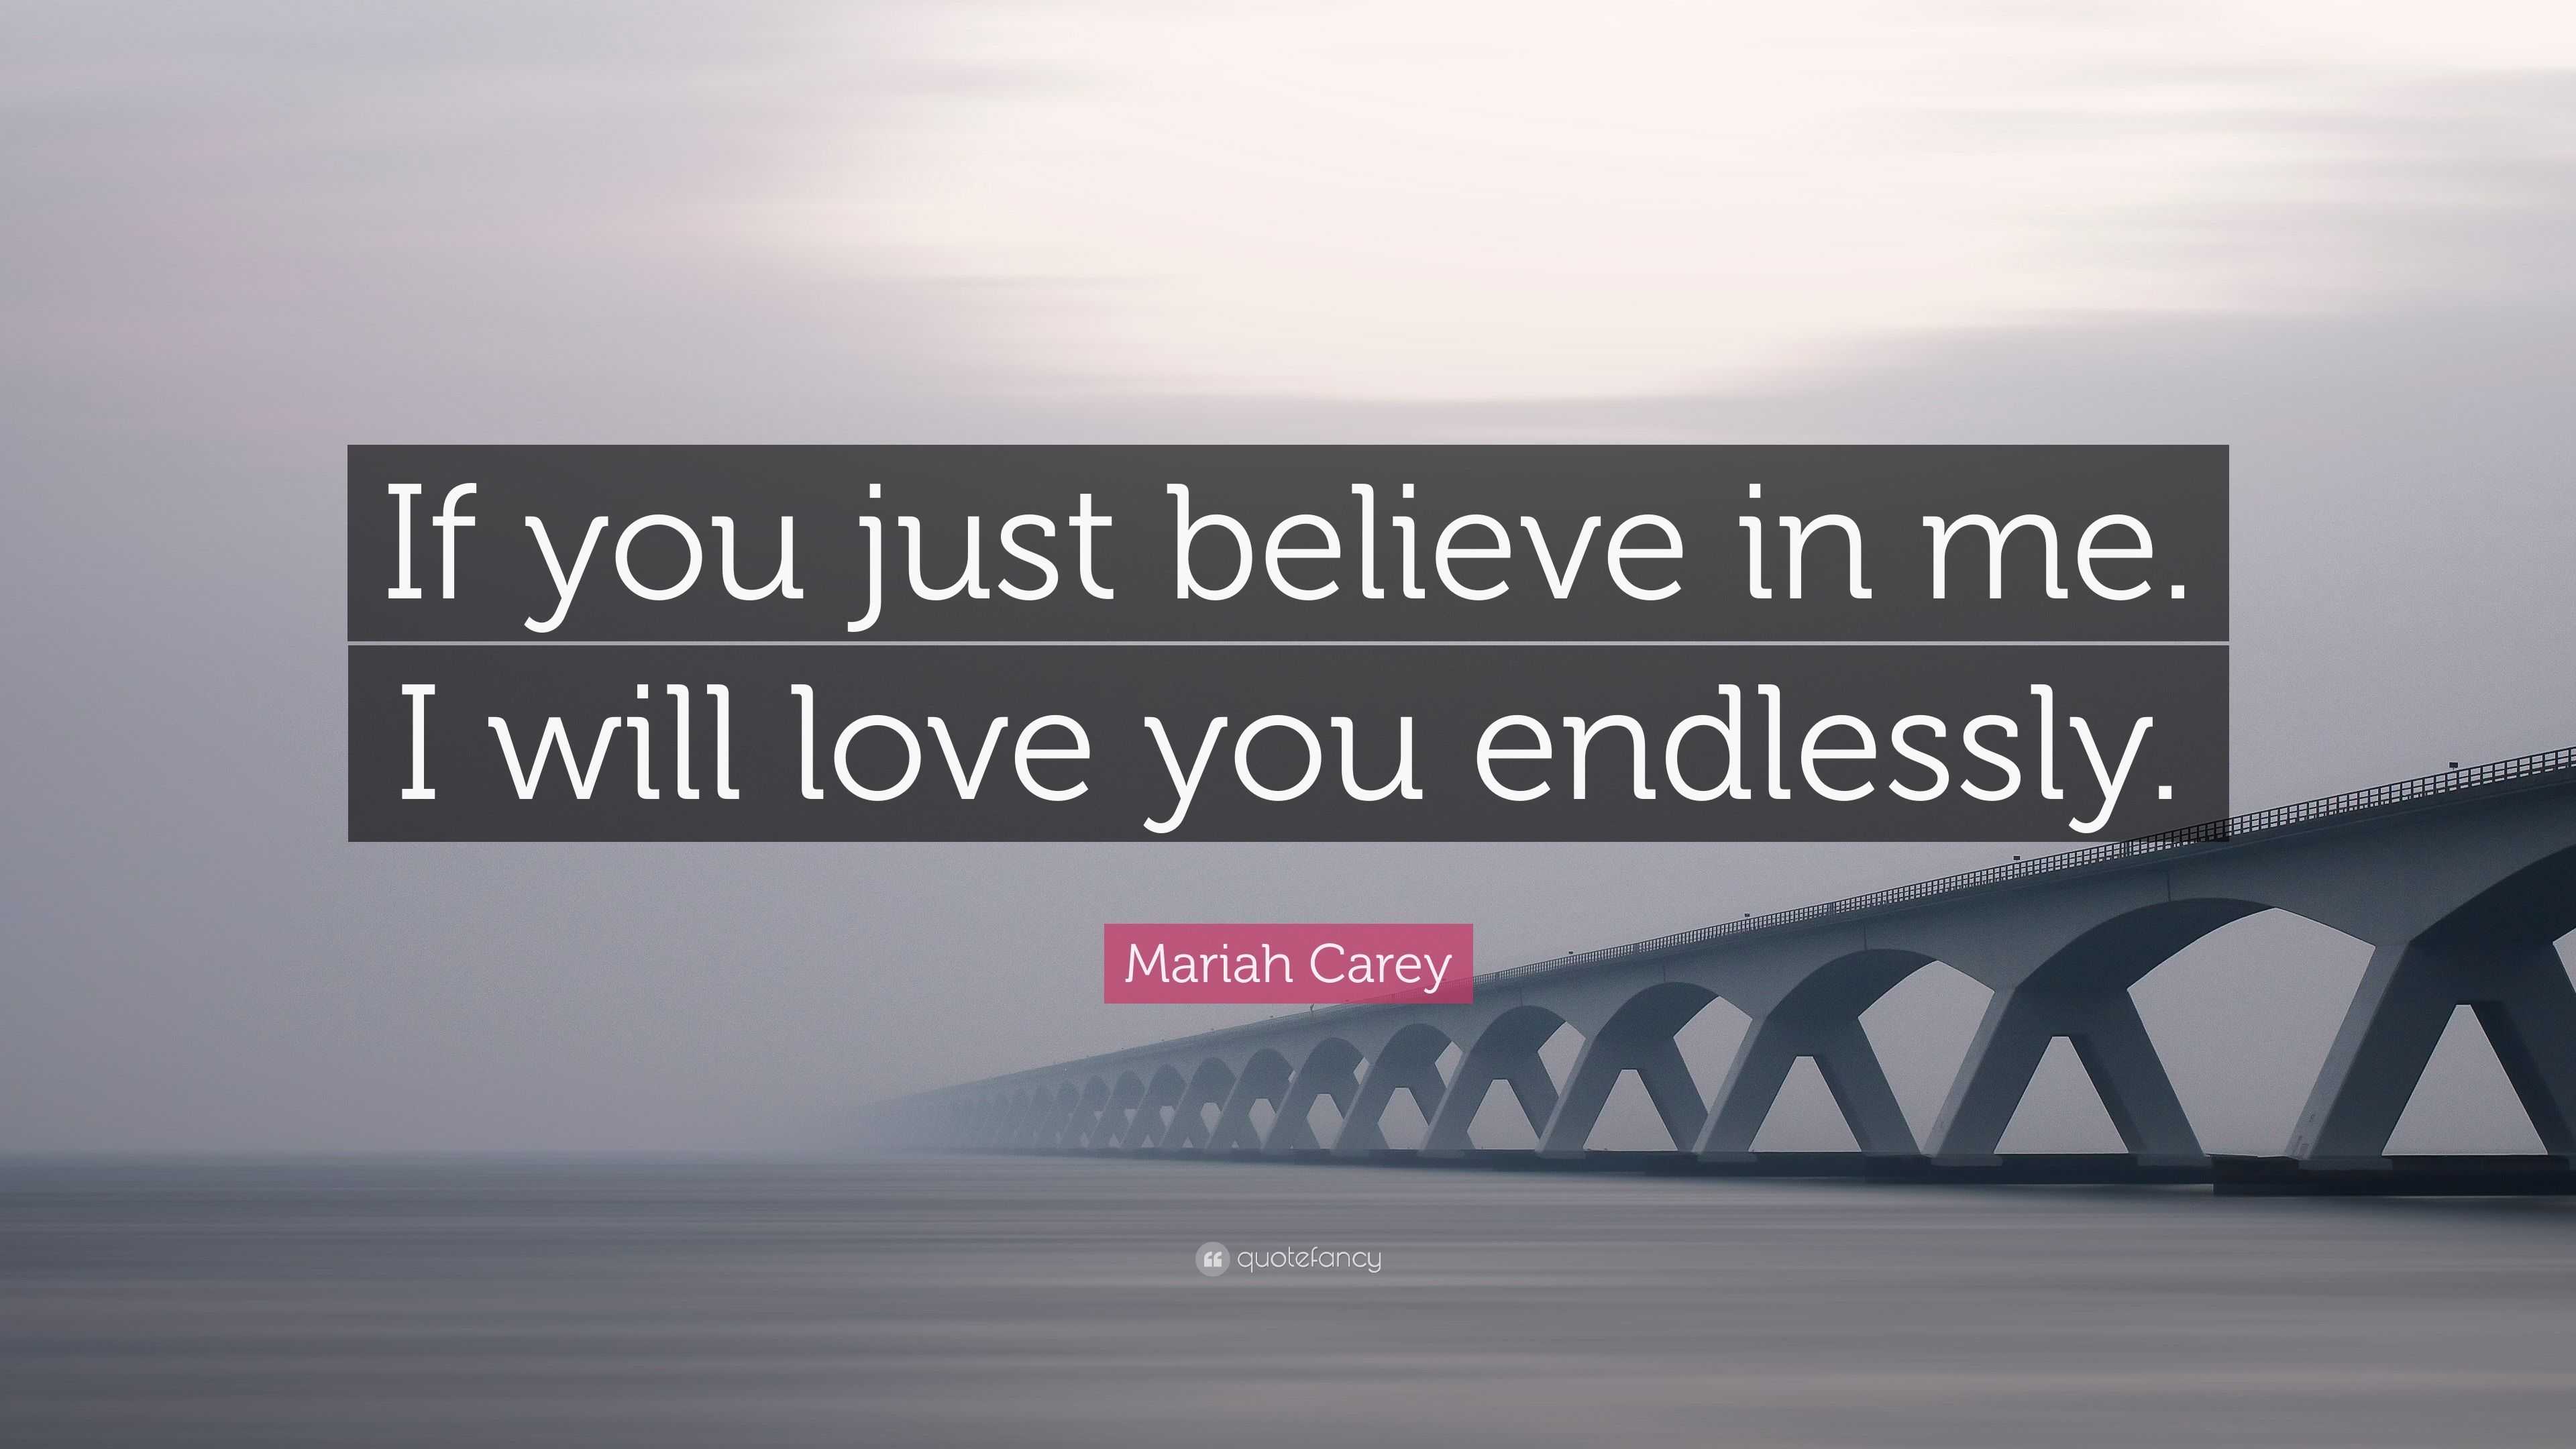 Mariah Carey Quote: "If you just believe in me. I will love you endlessly." (7 wallpapers ...